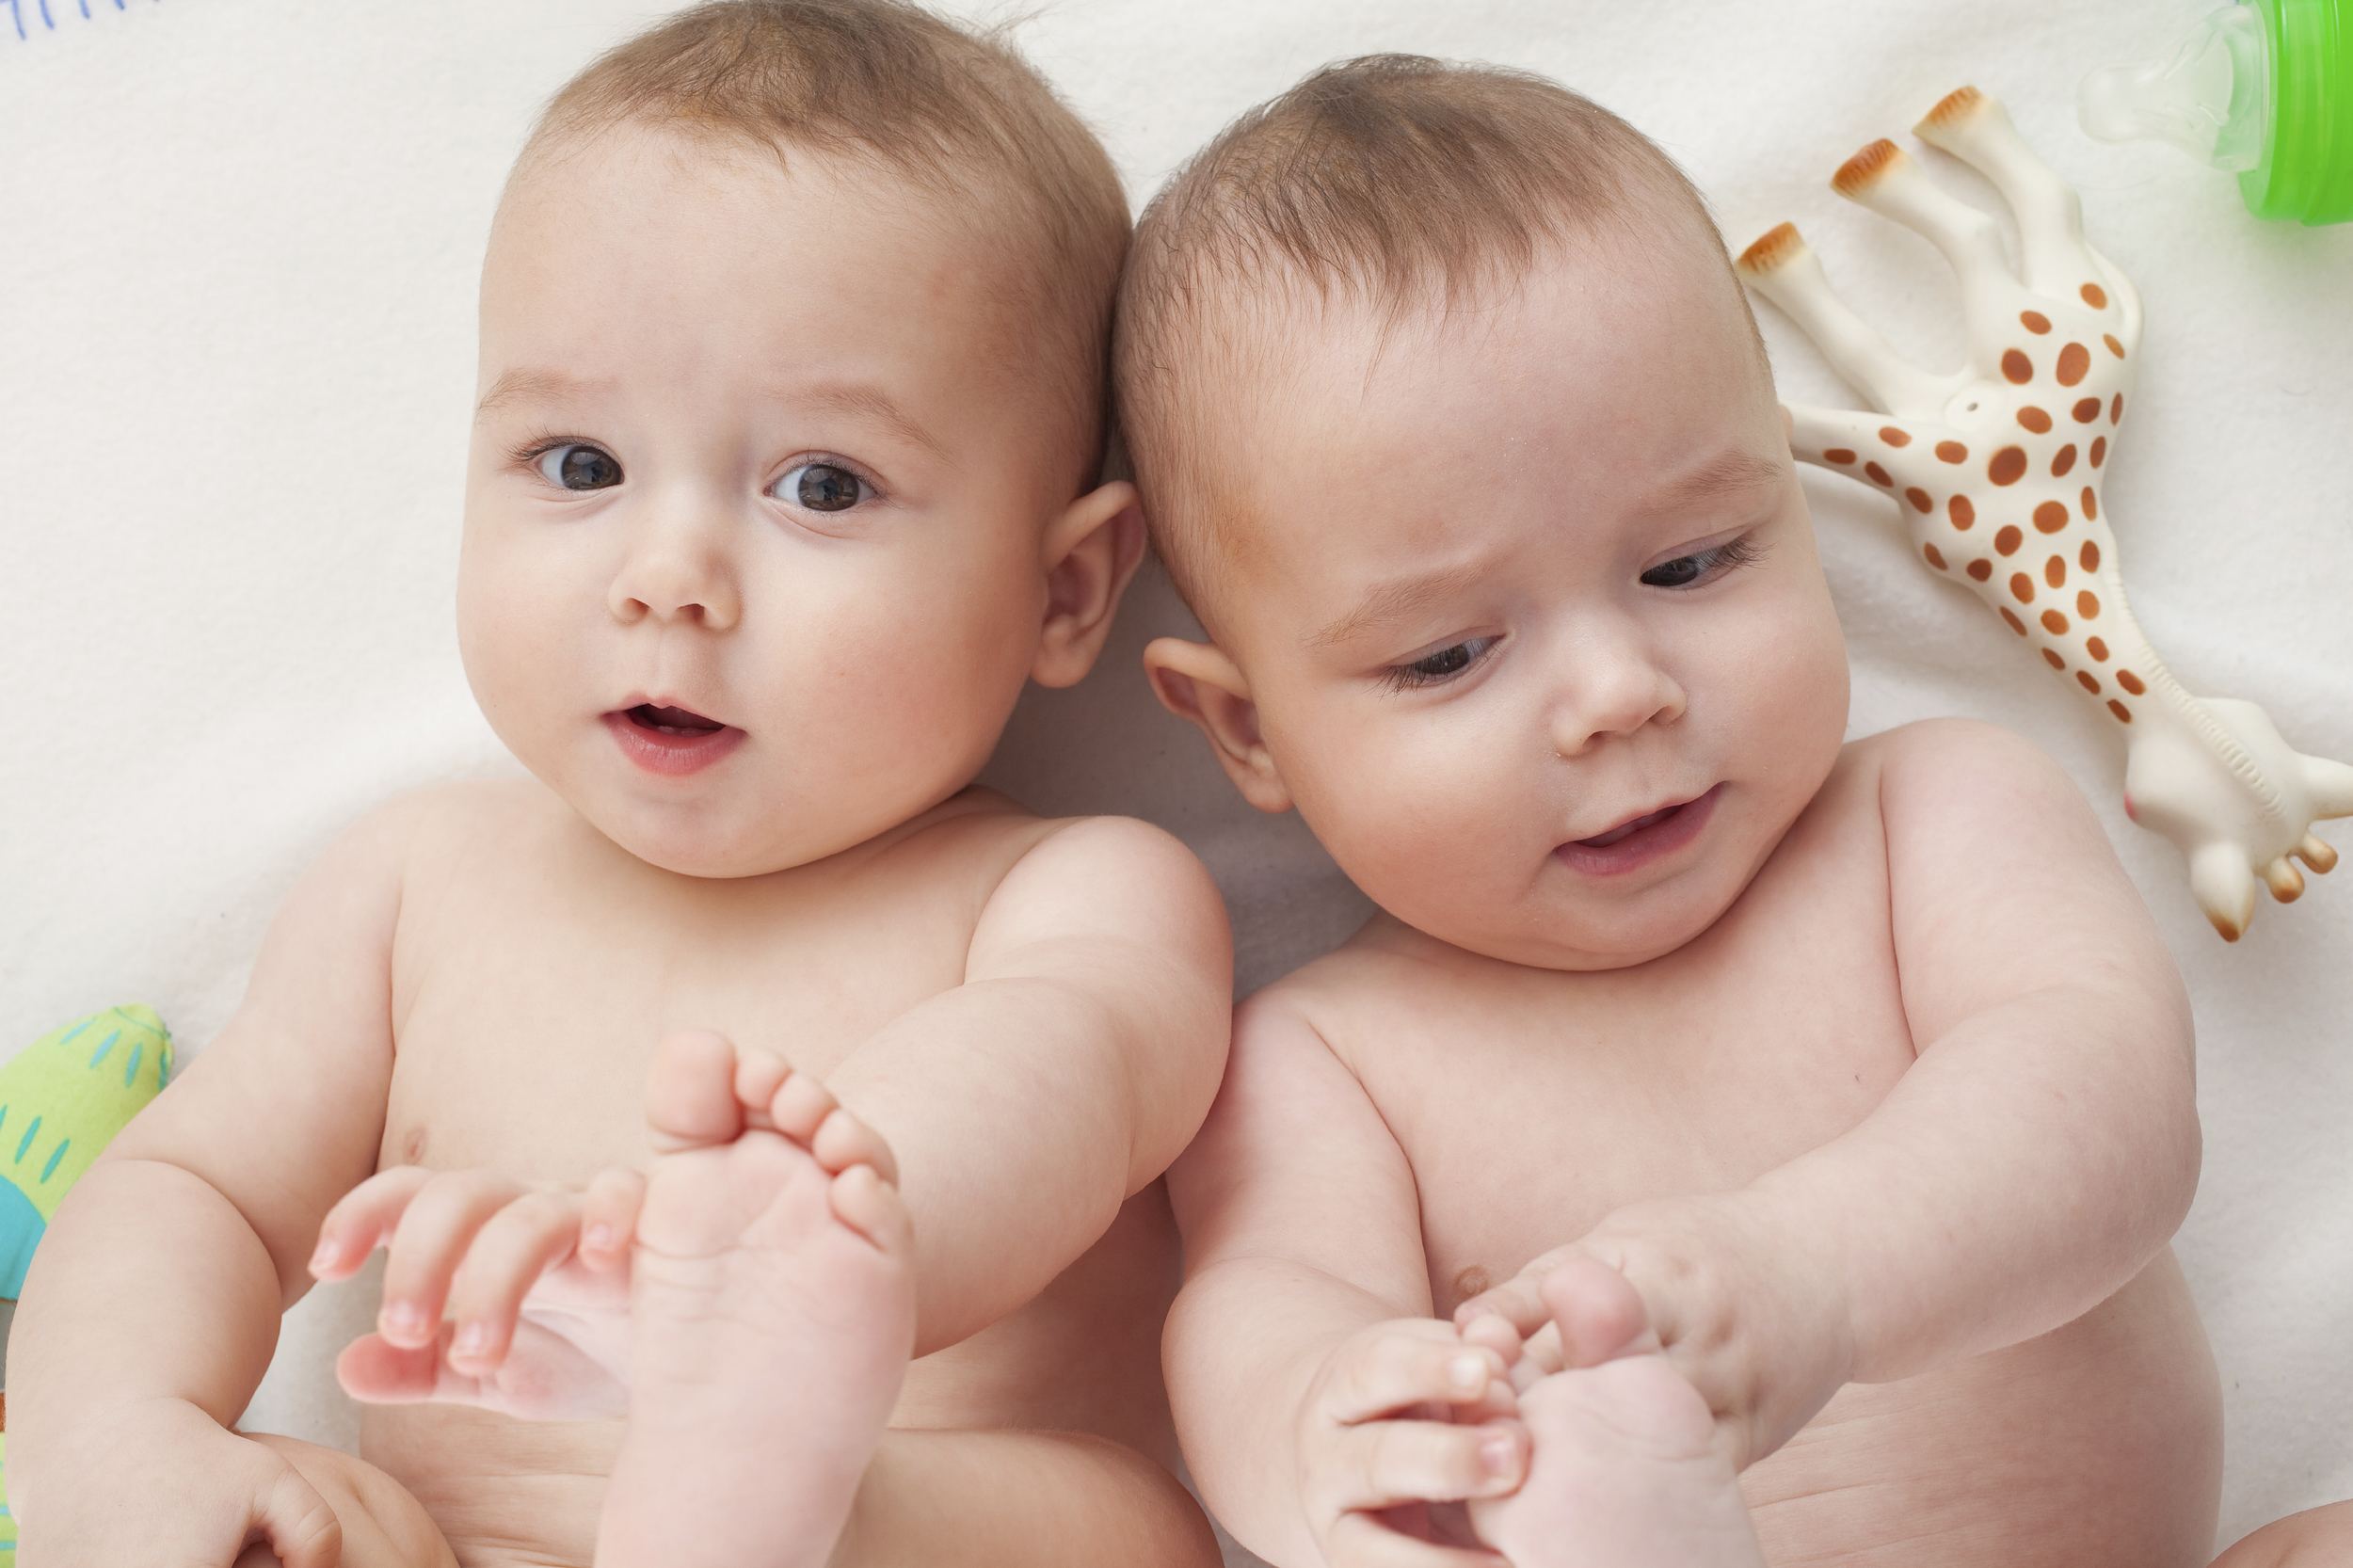 Babysitting Twins: 10 Tips for Managing Multiples - Sittercity.com